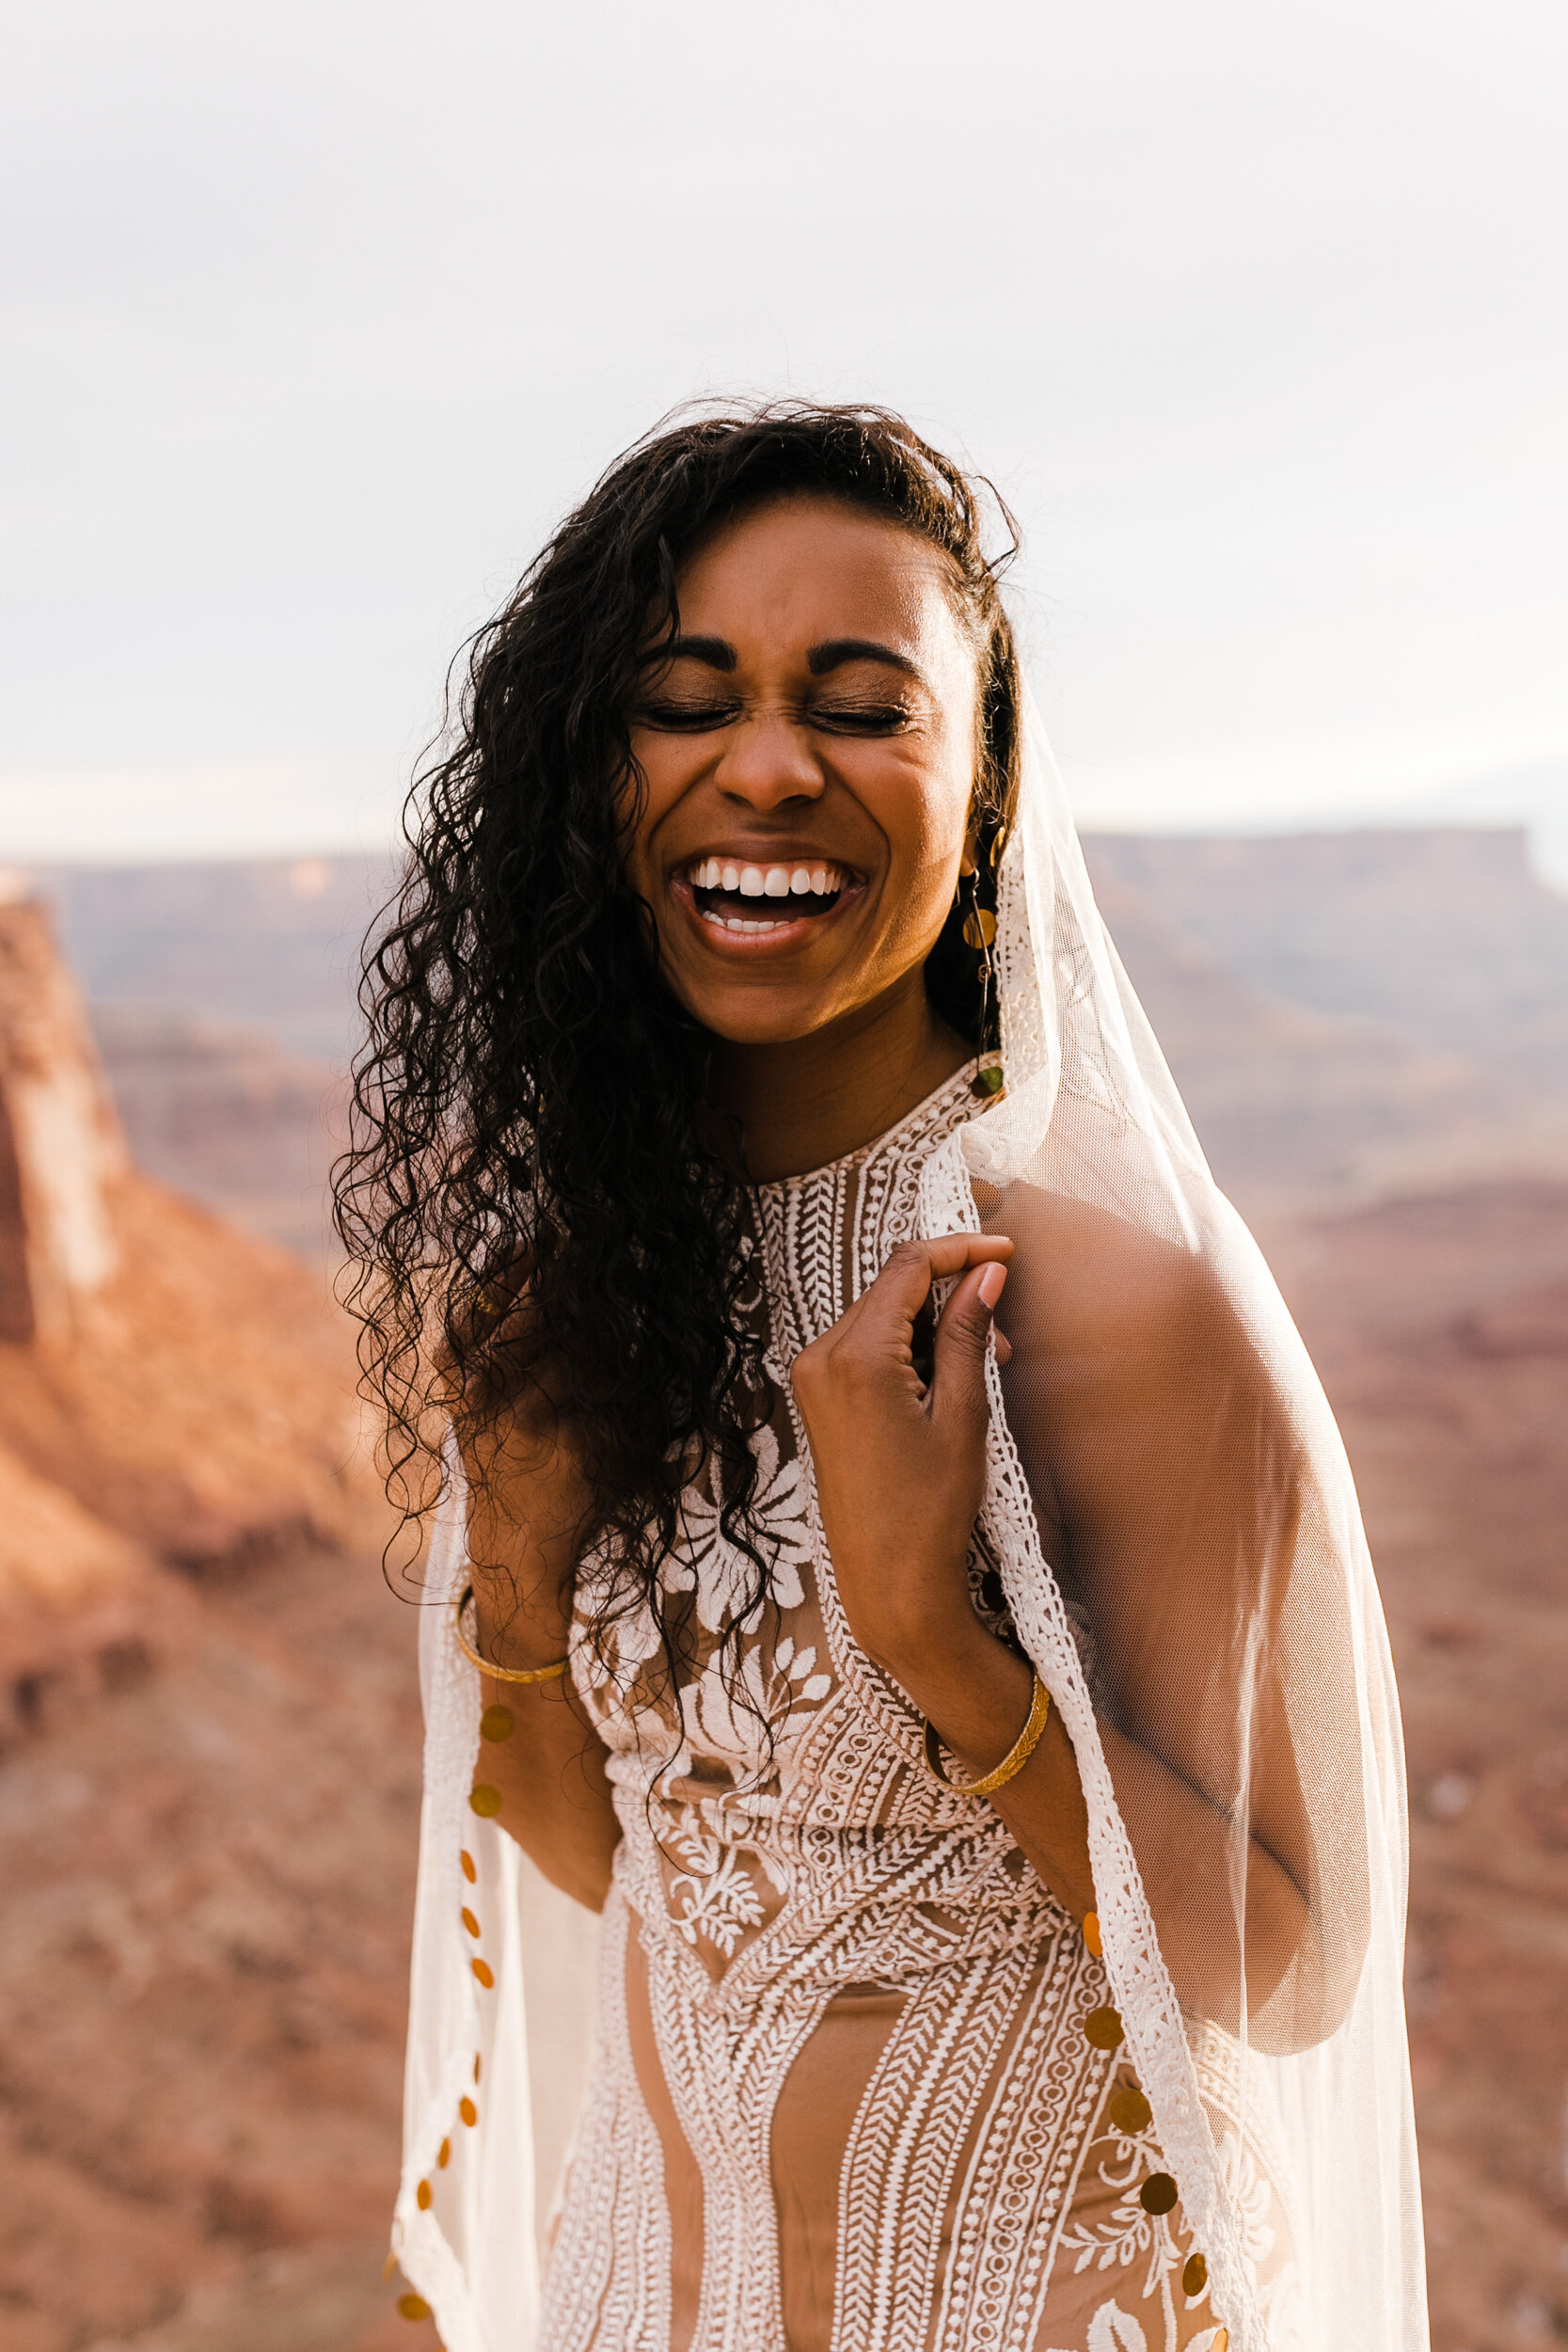 This Moab Elopement in Canyonlands National Park is major desert wedding inspiration! A surprise proposal at sunrise and Rue De Seine East Gown and Gold Coin Veil by The Hearnes Adventure Photography